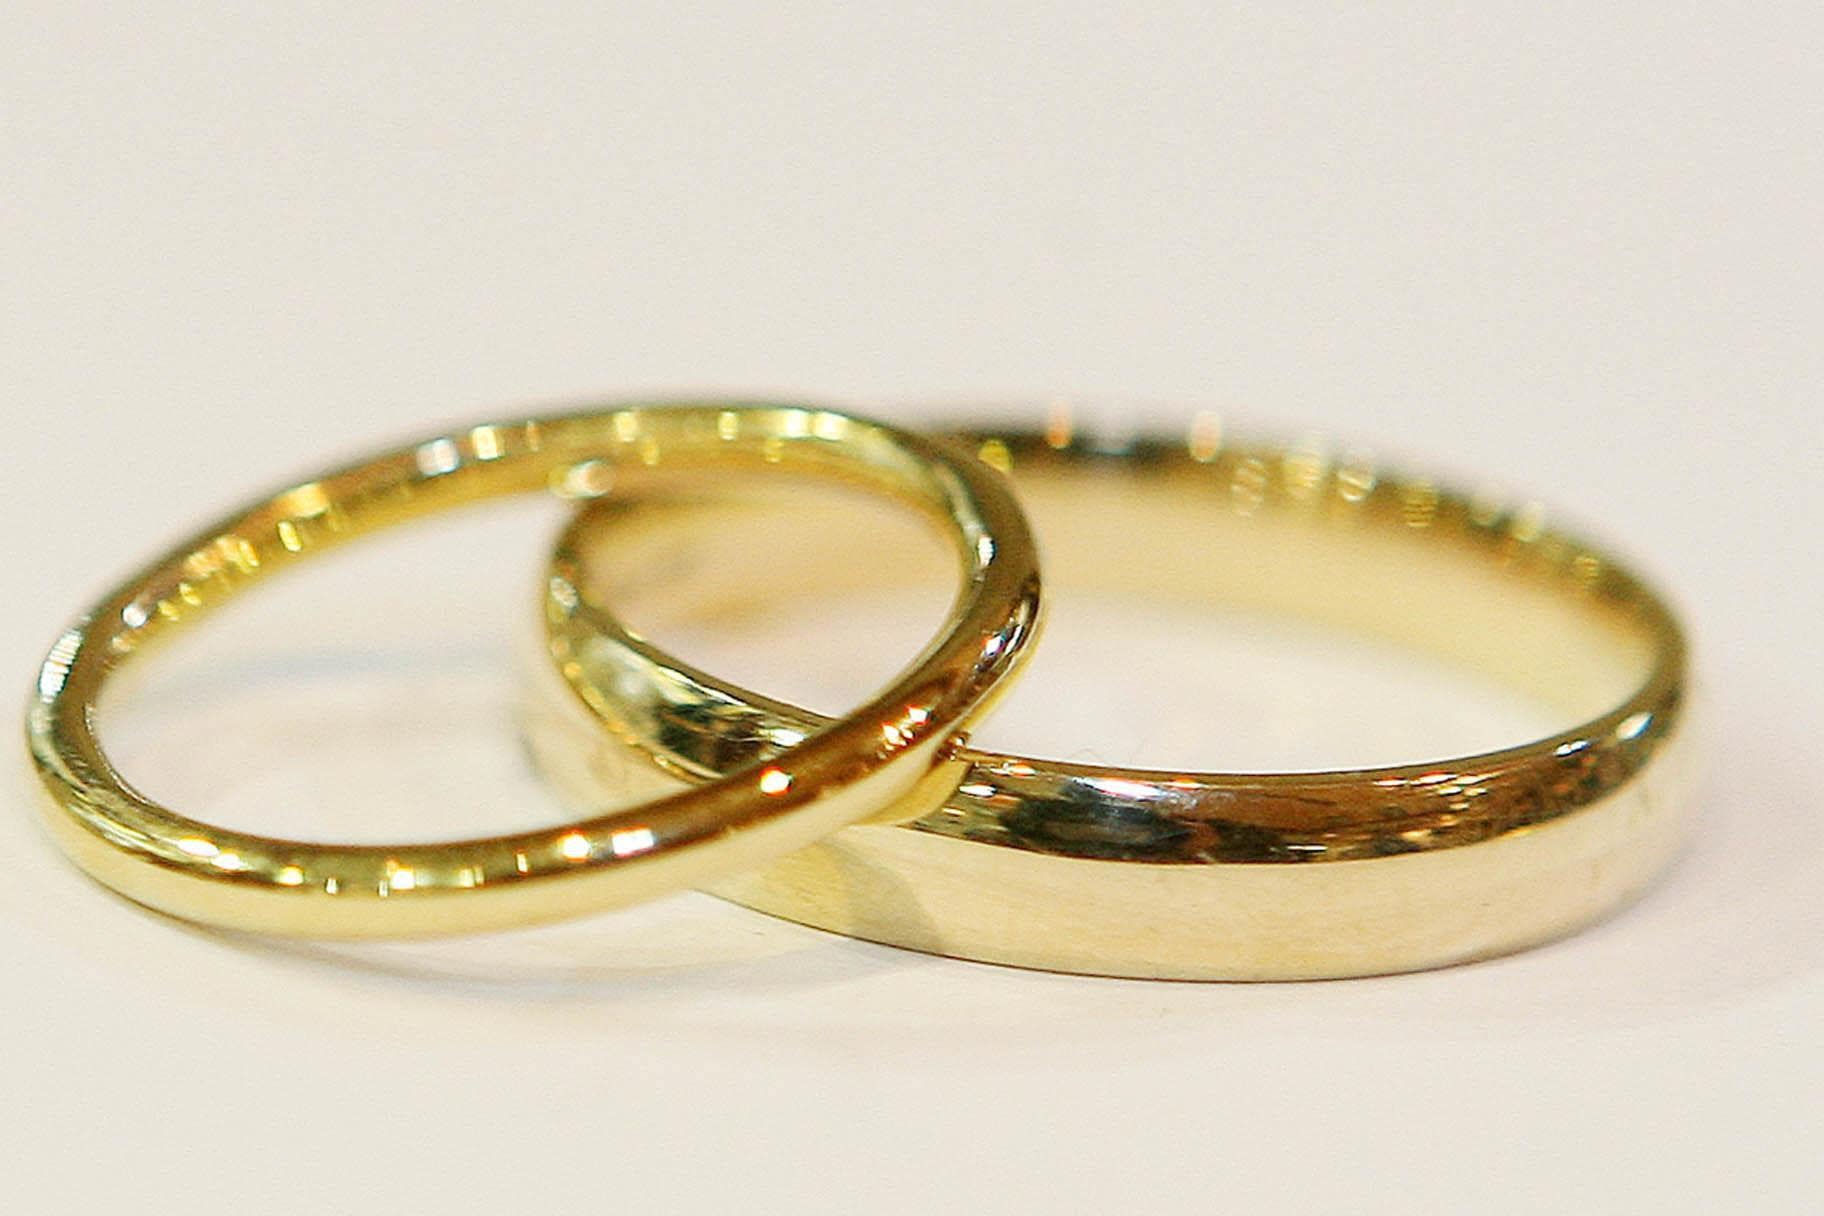 Nearly four in 10 adults in England and Wales have never been married or been in a civil partnership